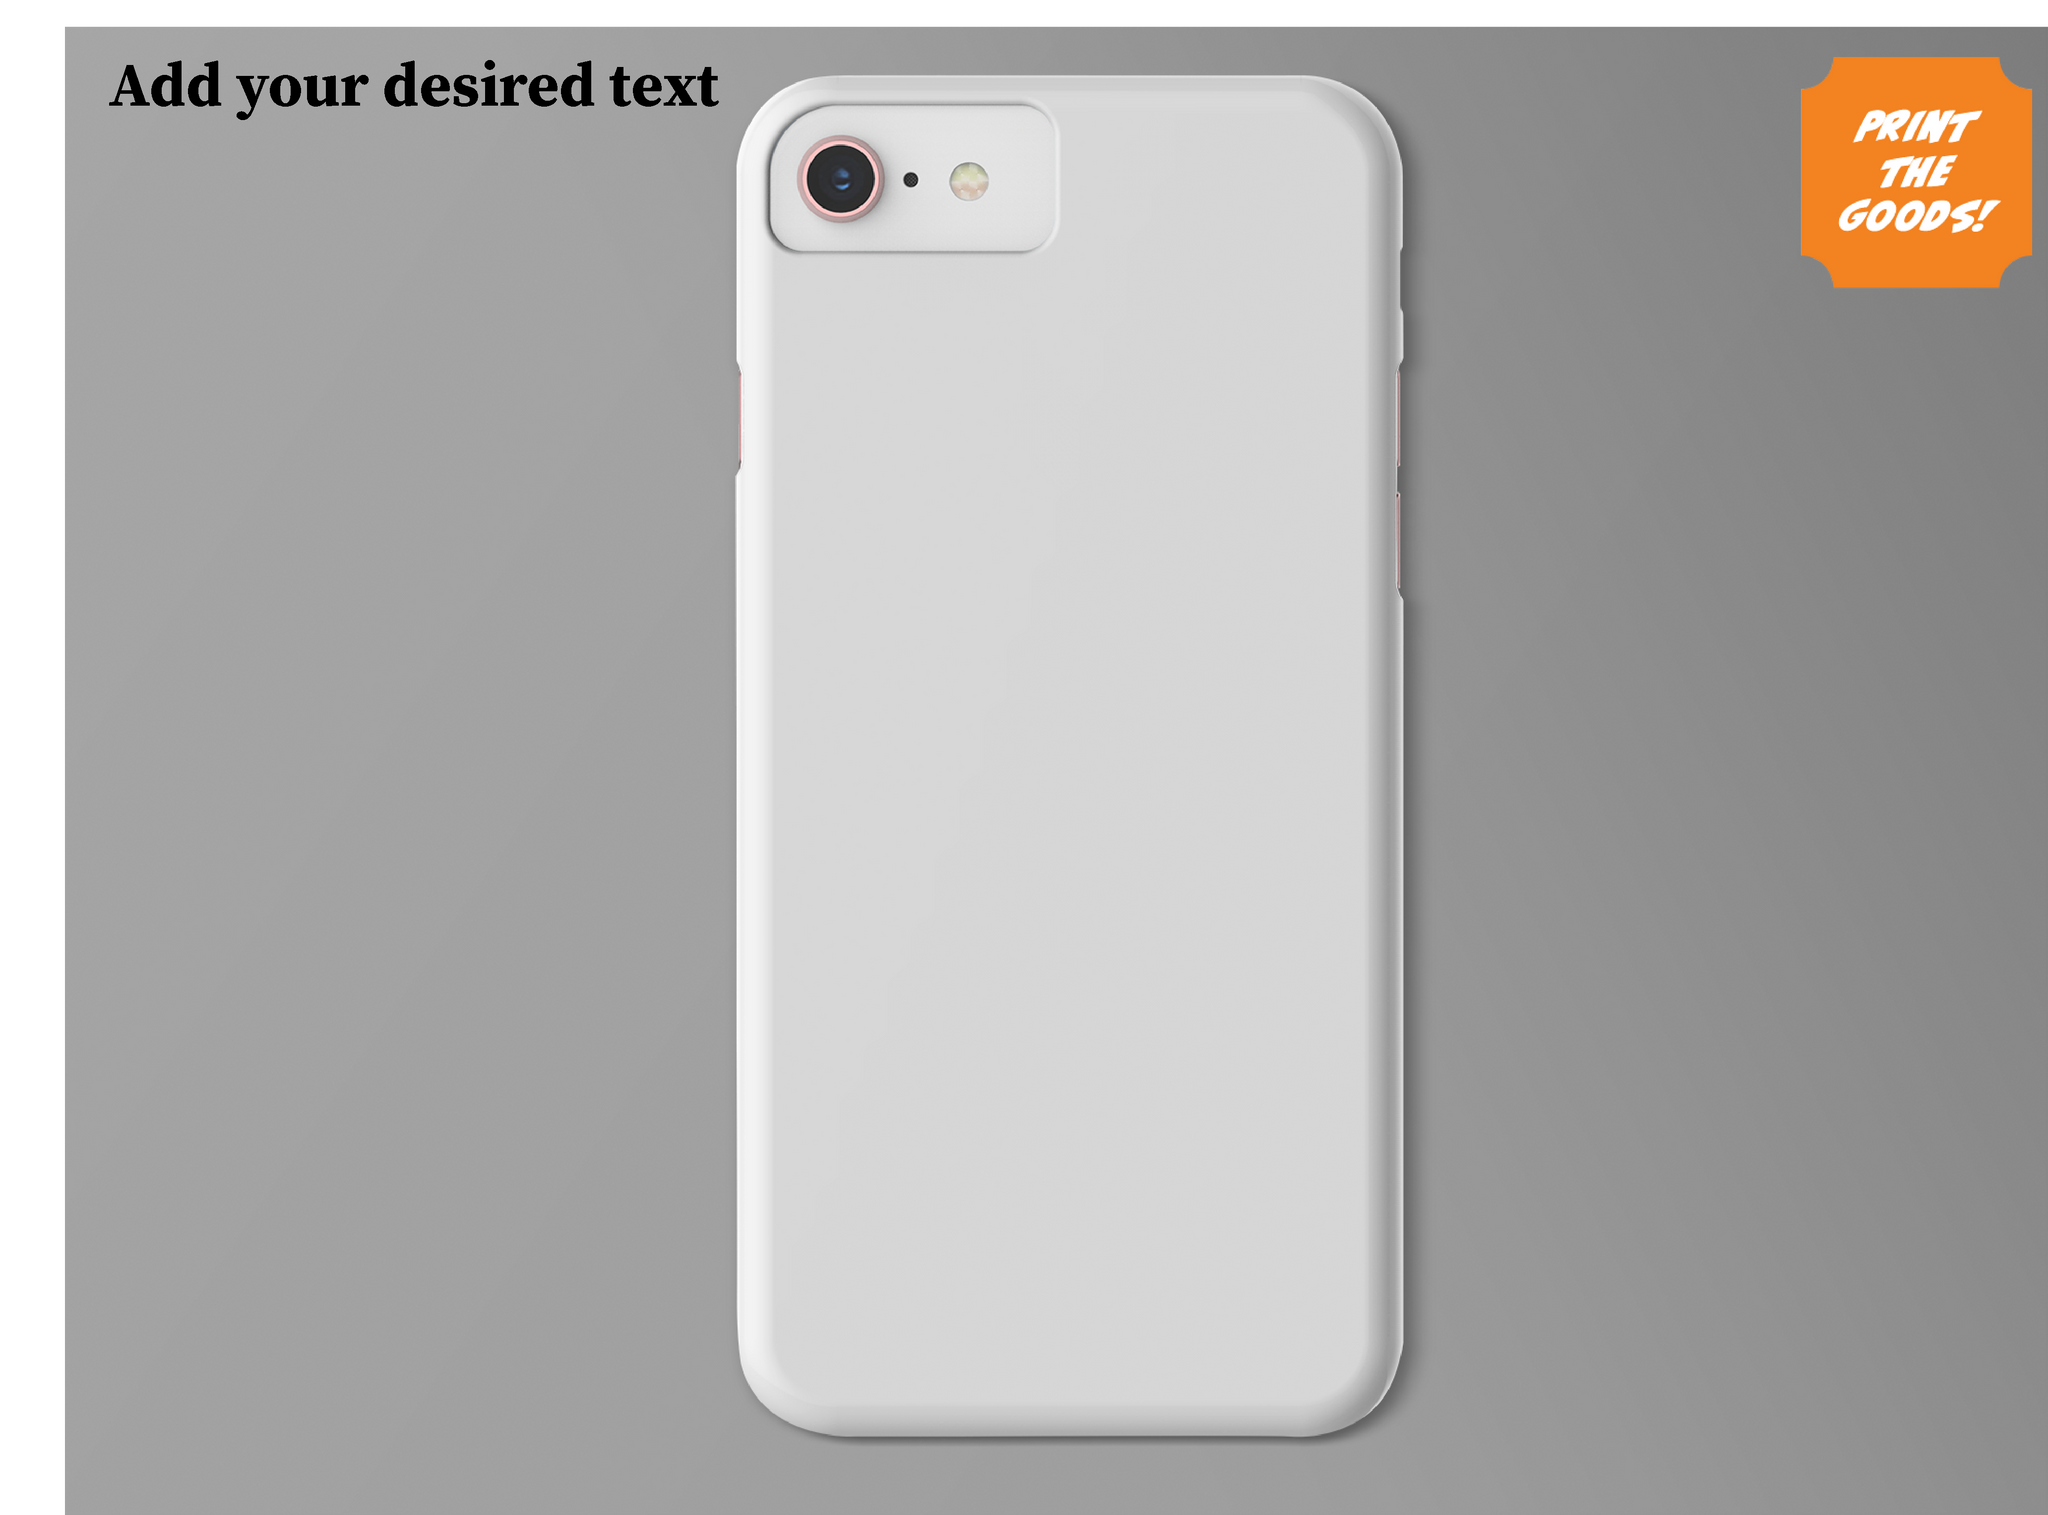 Custom Huawei Phone Cases - Add your text